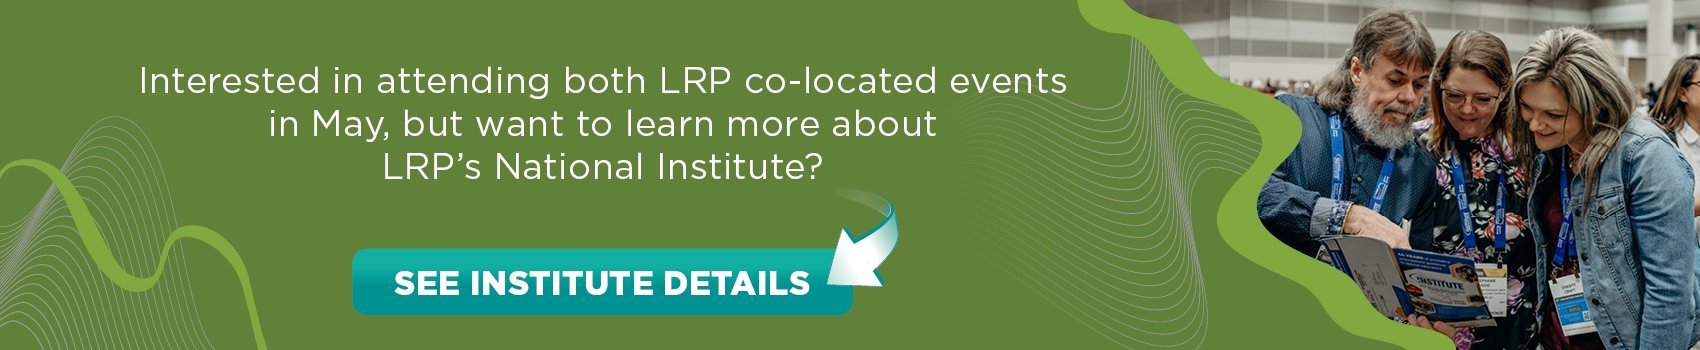 Interested in attending both LRP co-located events in May, but want to learn more about LRP’s National Institute? SEE INSTITUTE DETAILS  